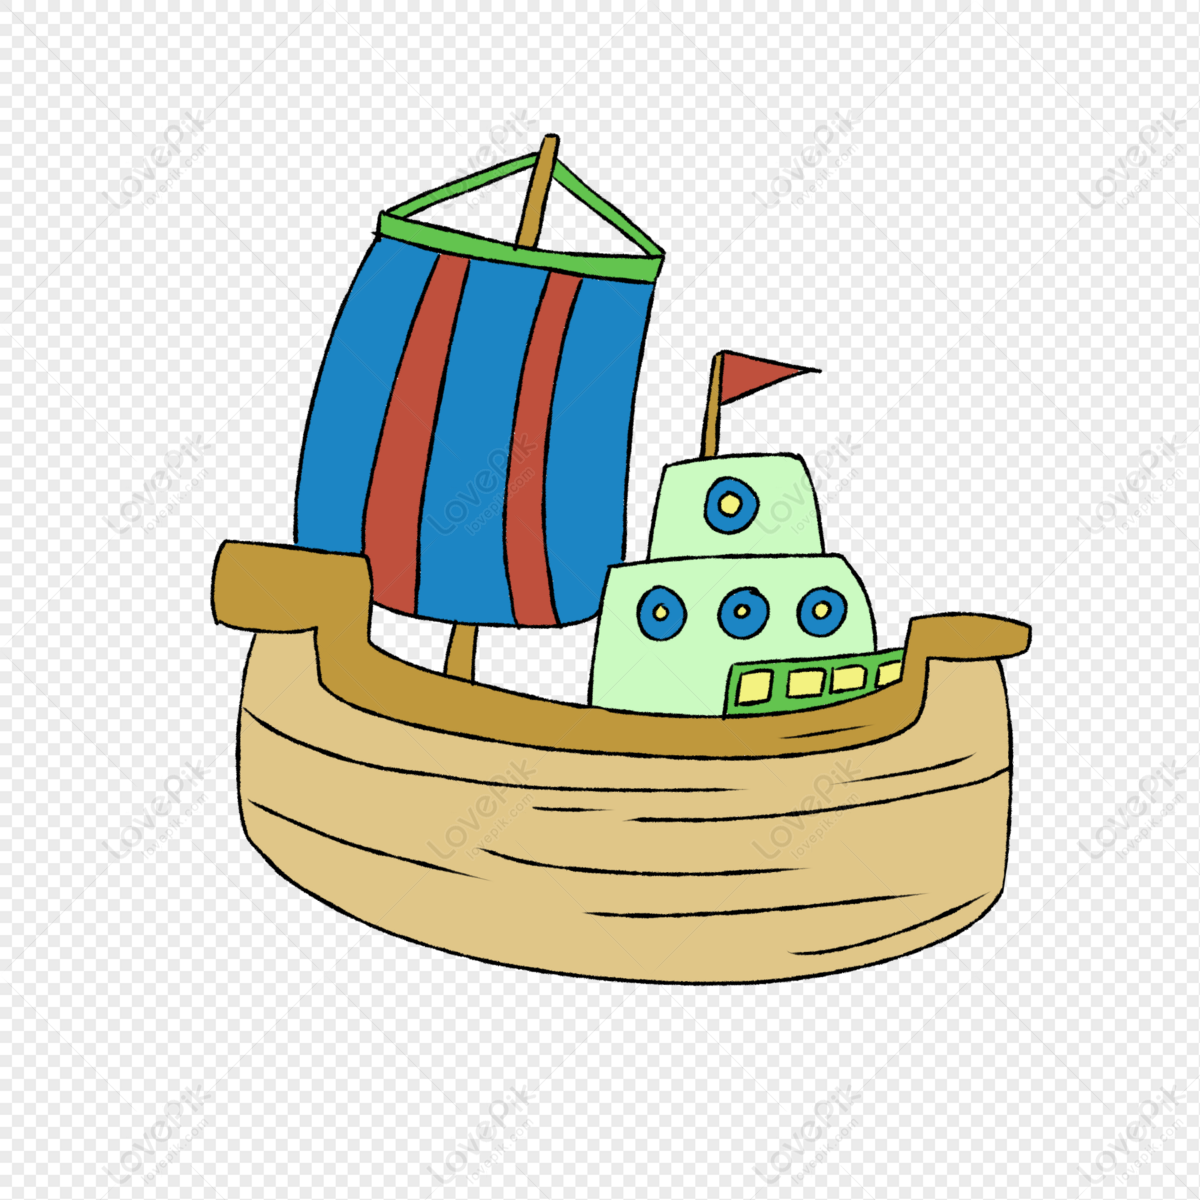 Pirate Ship PNG Picture And Clipart Image For Free Download - Lovepik |  401272795